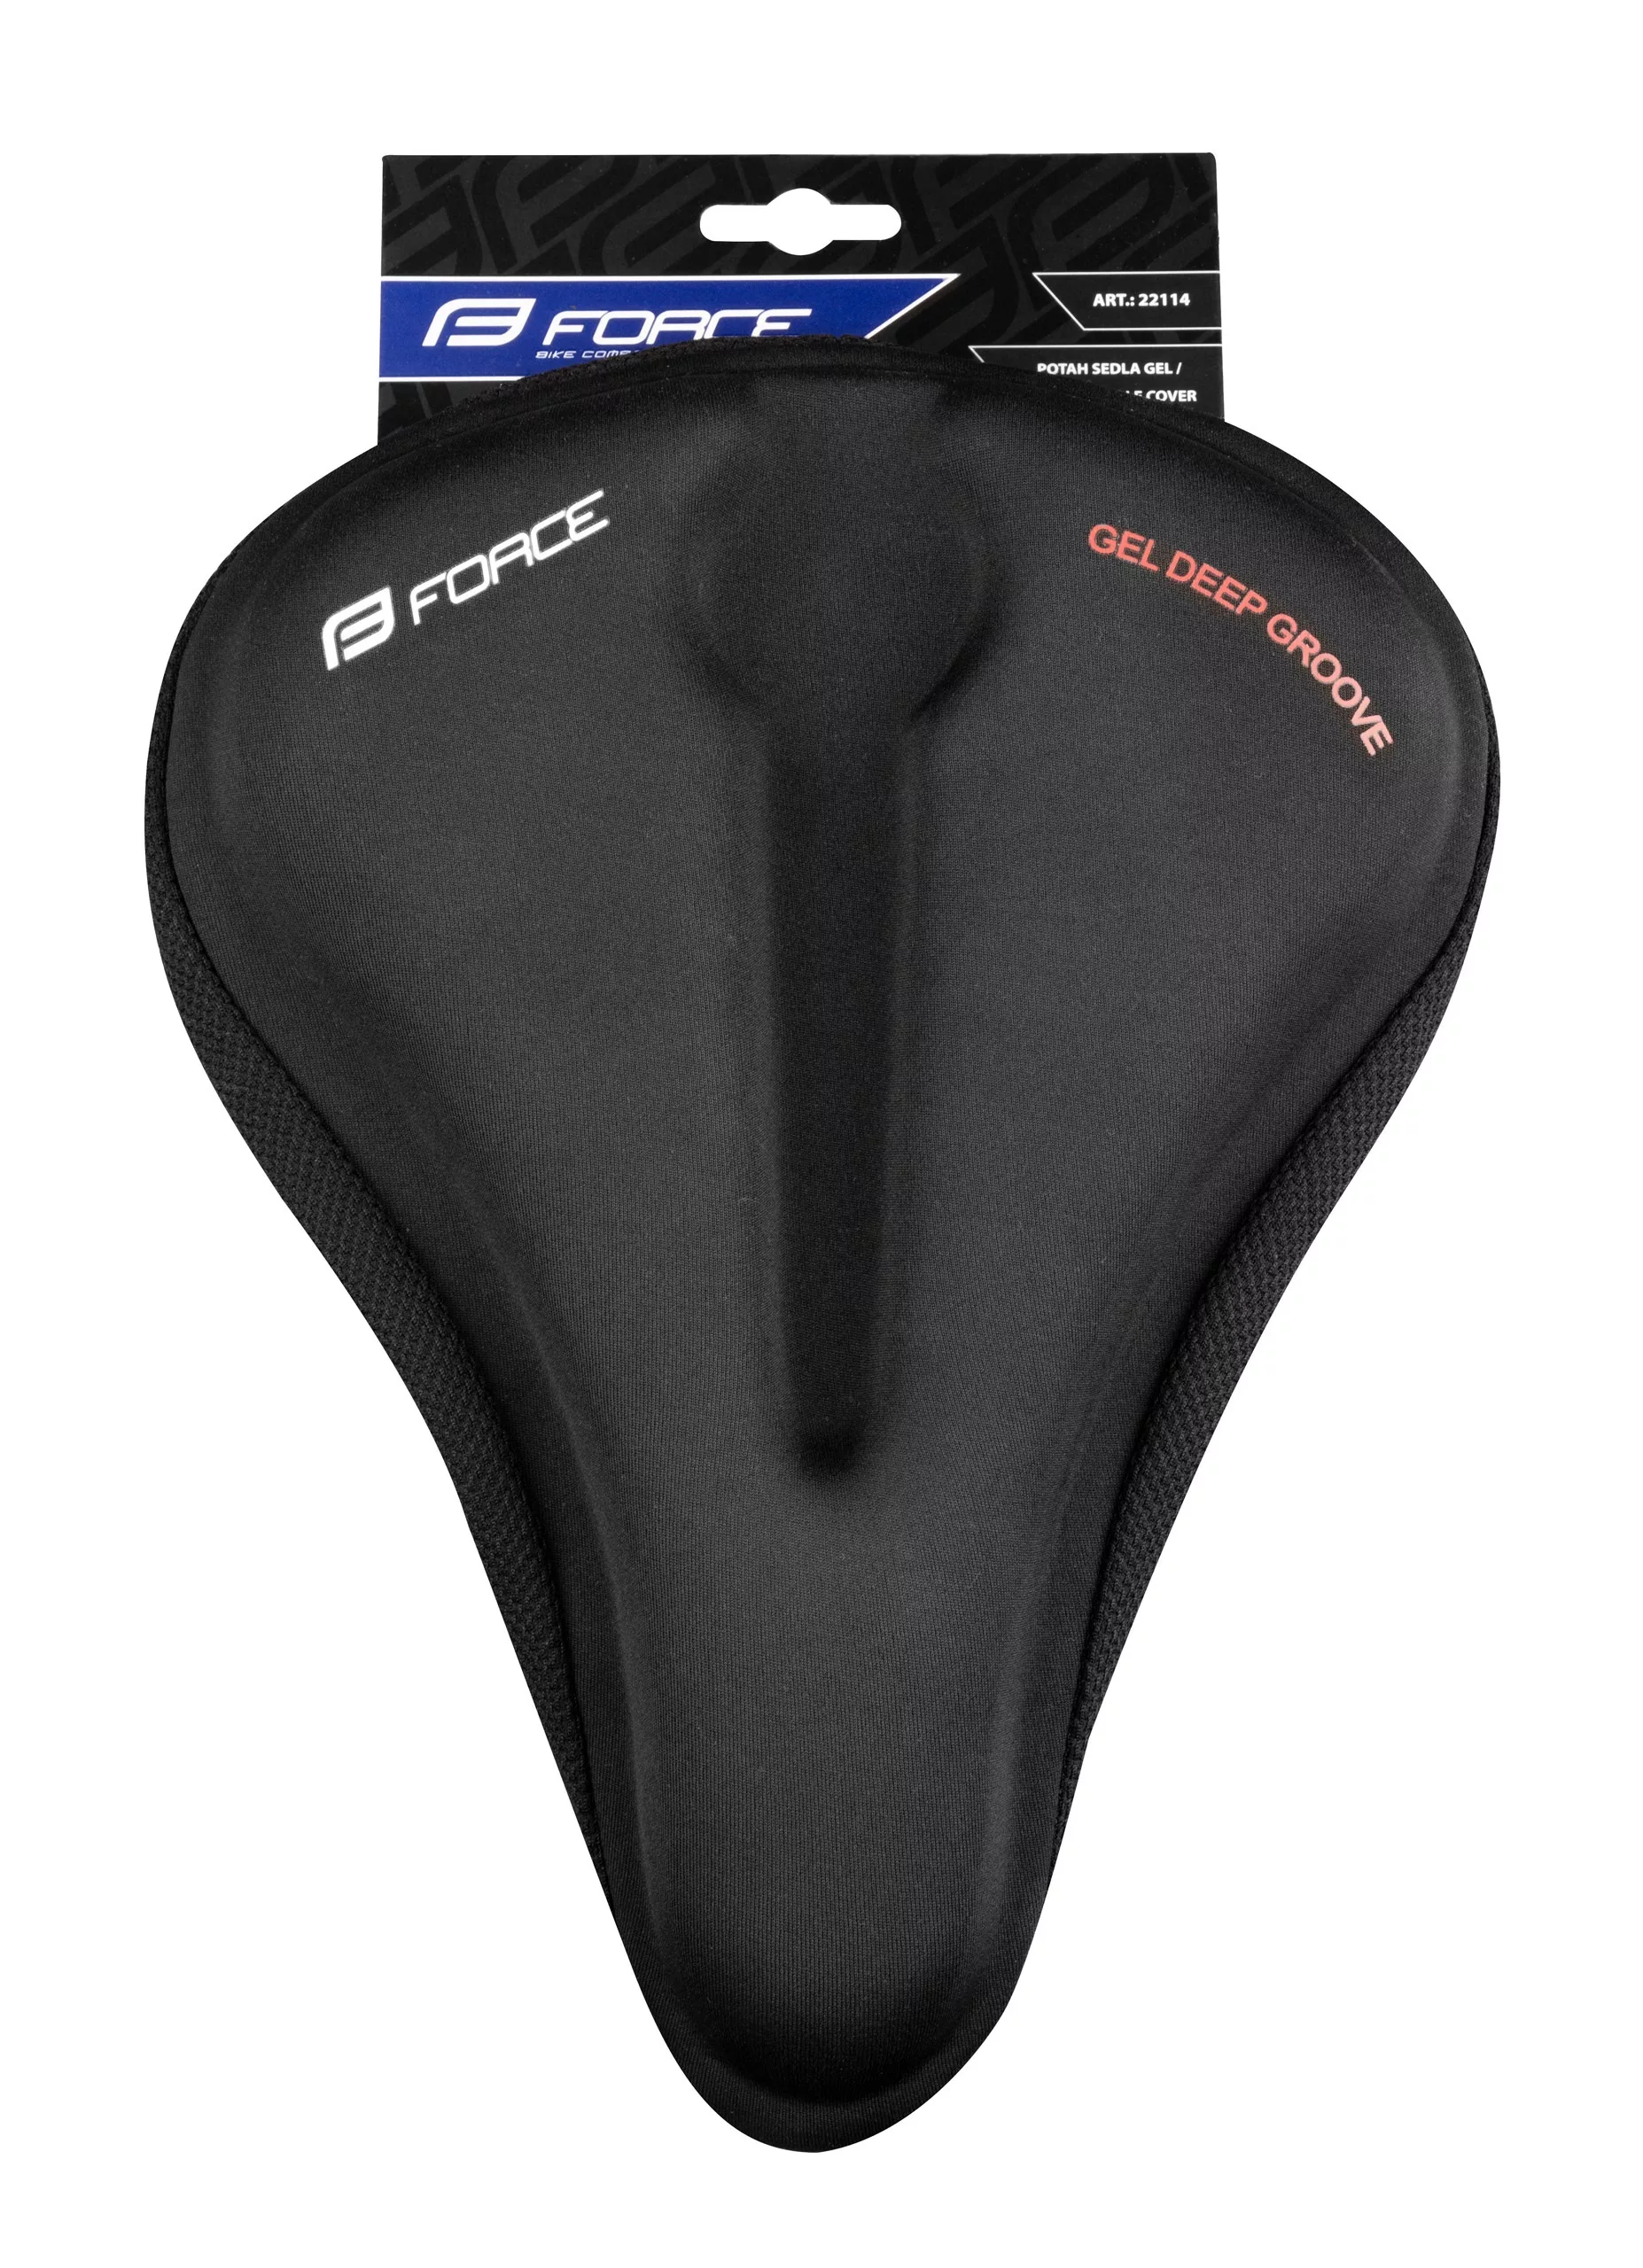 saddle-cover-force-gel-290-x-215-mm-shaped-img-22114_bal-fd-11